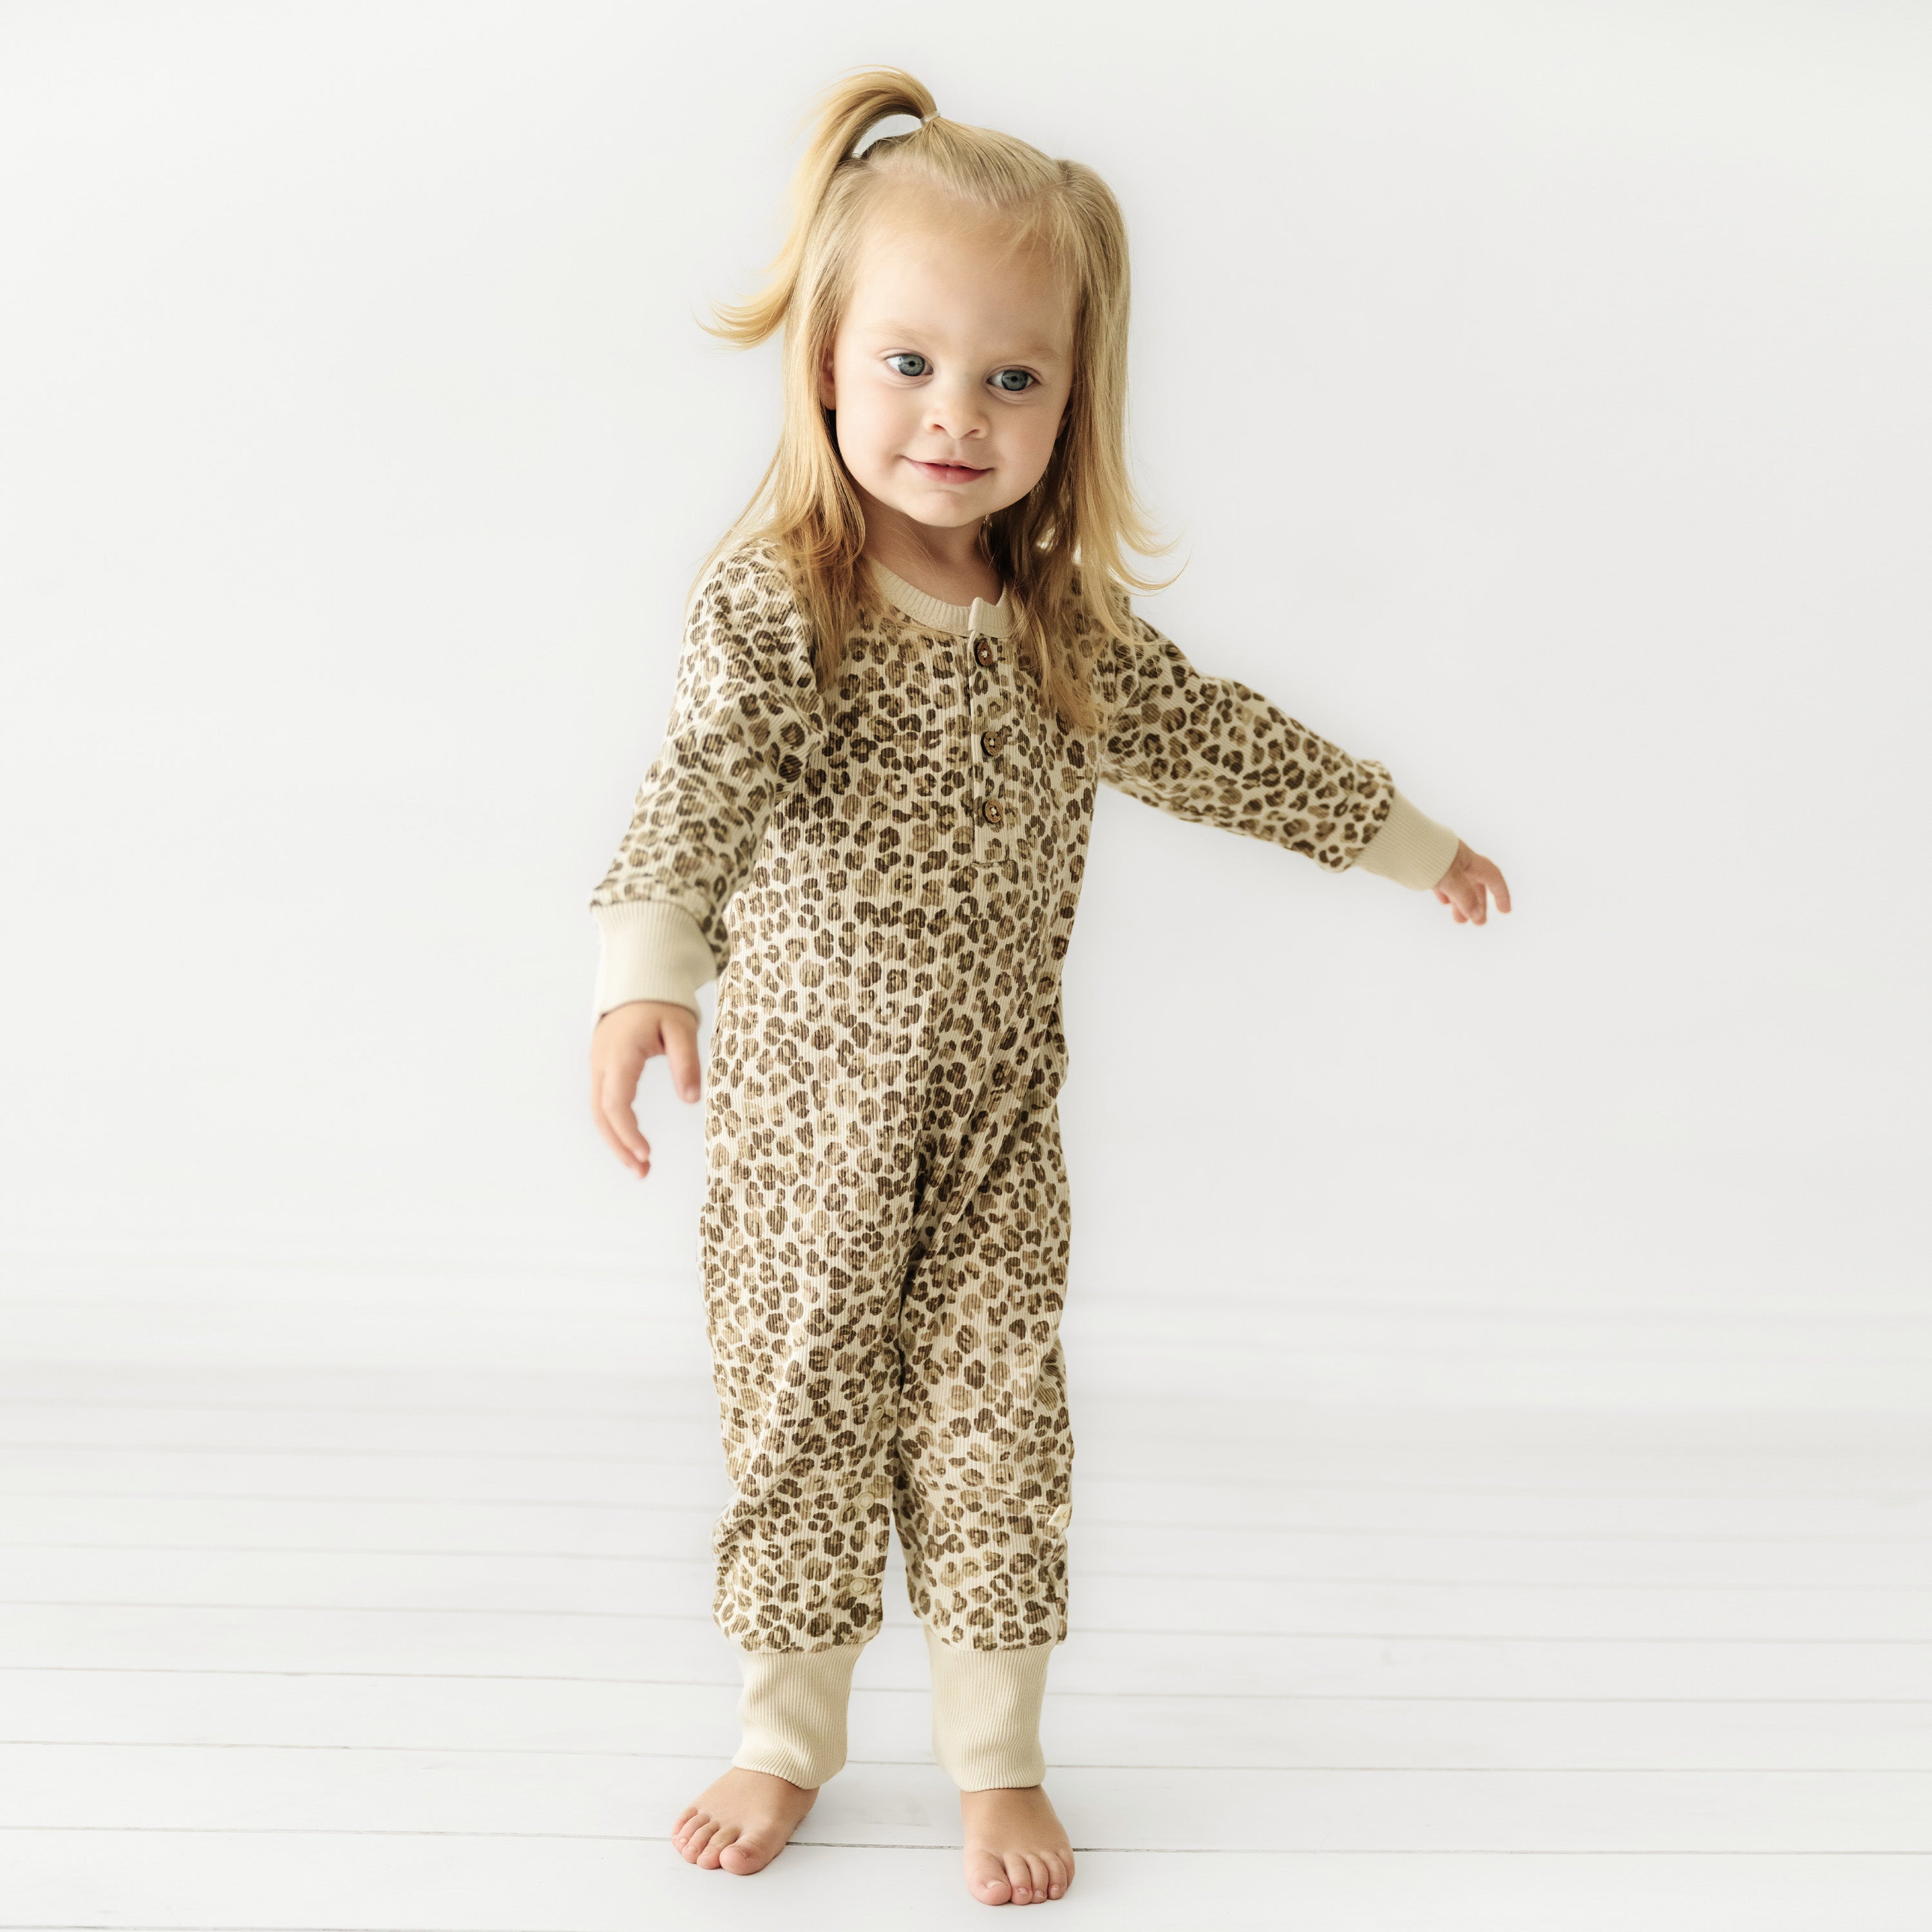 A toddler with blonde hair secured in a ponytail wearing an Organic Baby leopard print jumpsuit stands smiling against a white background.